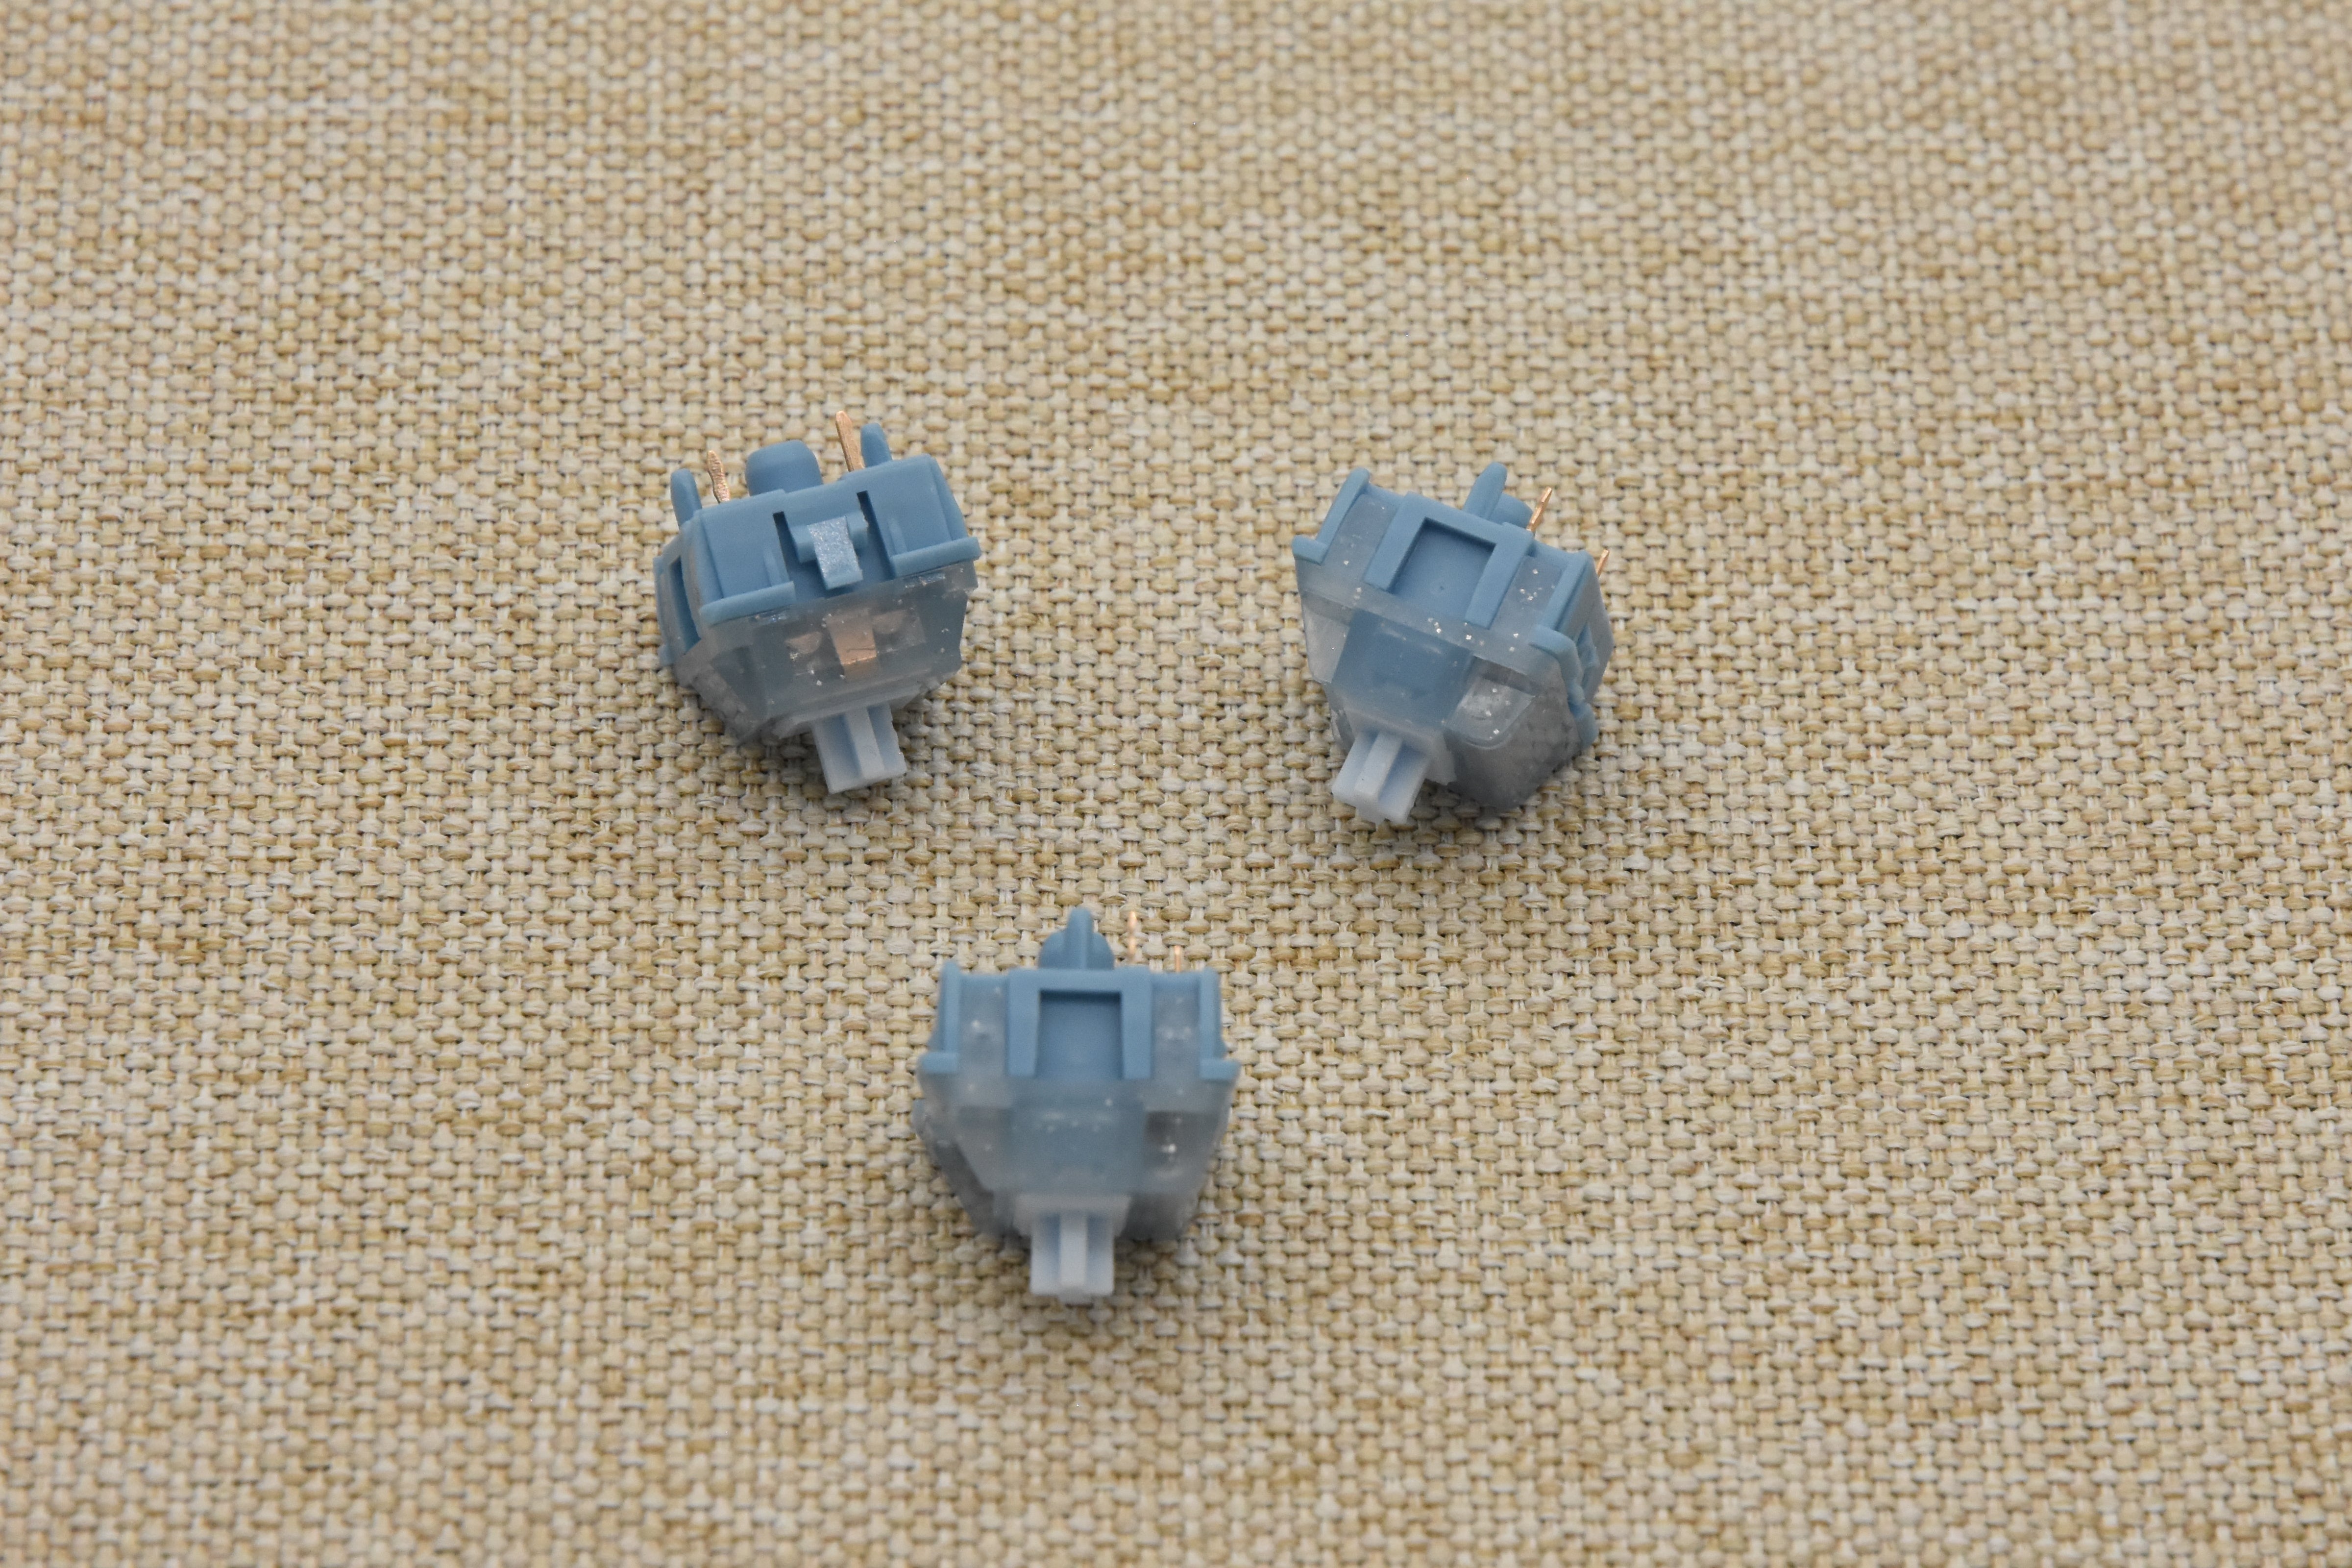 HMX BLUE TOPAZ LINEAR SWITCH FACTORY LUBED EDITION (10PCS)ni